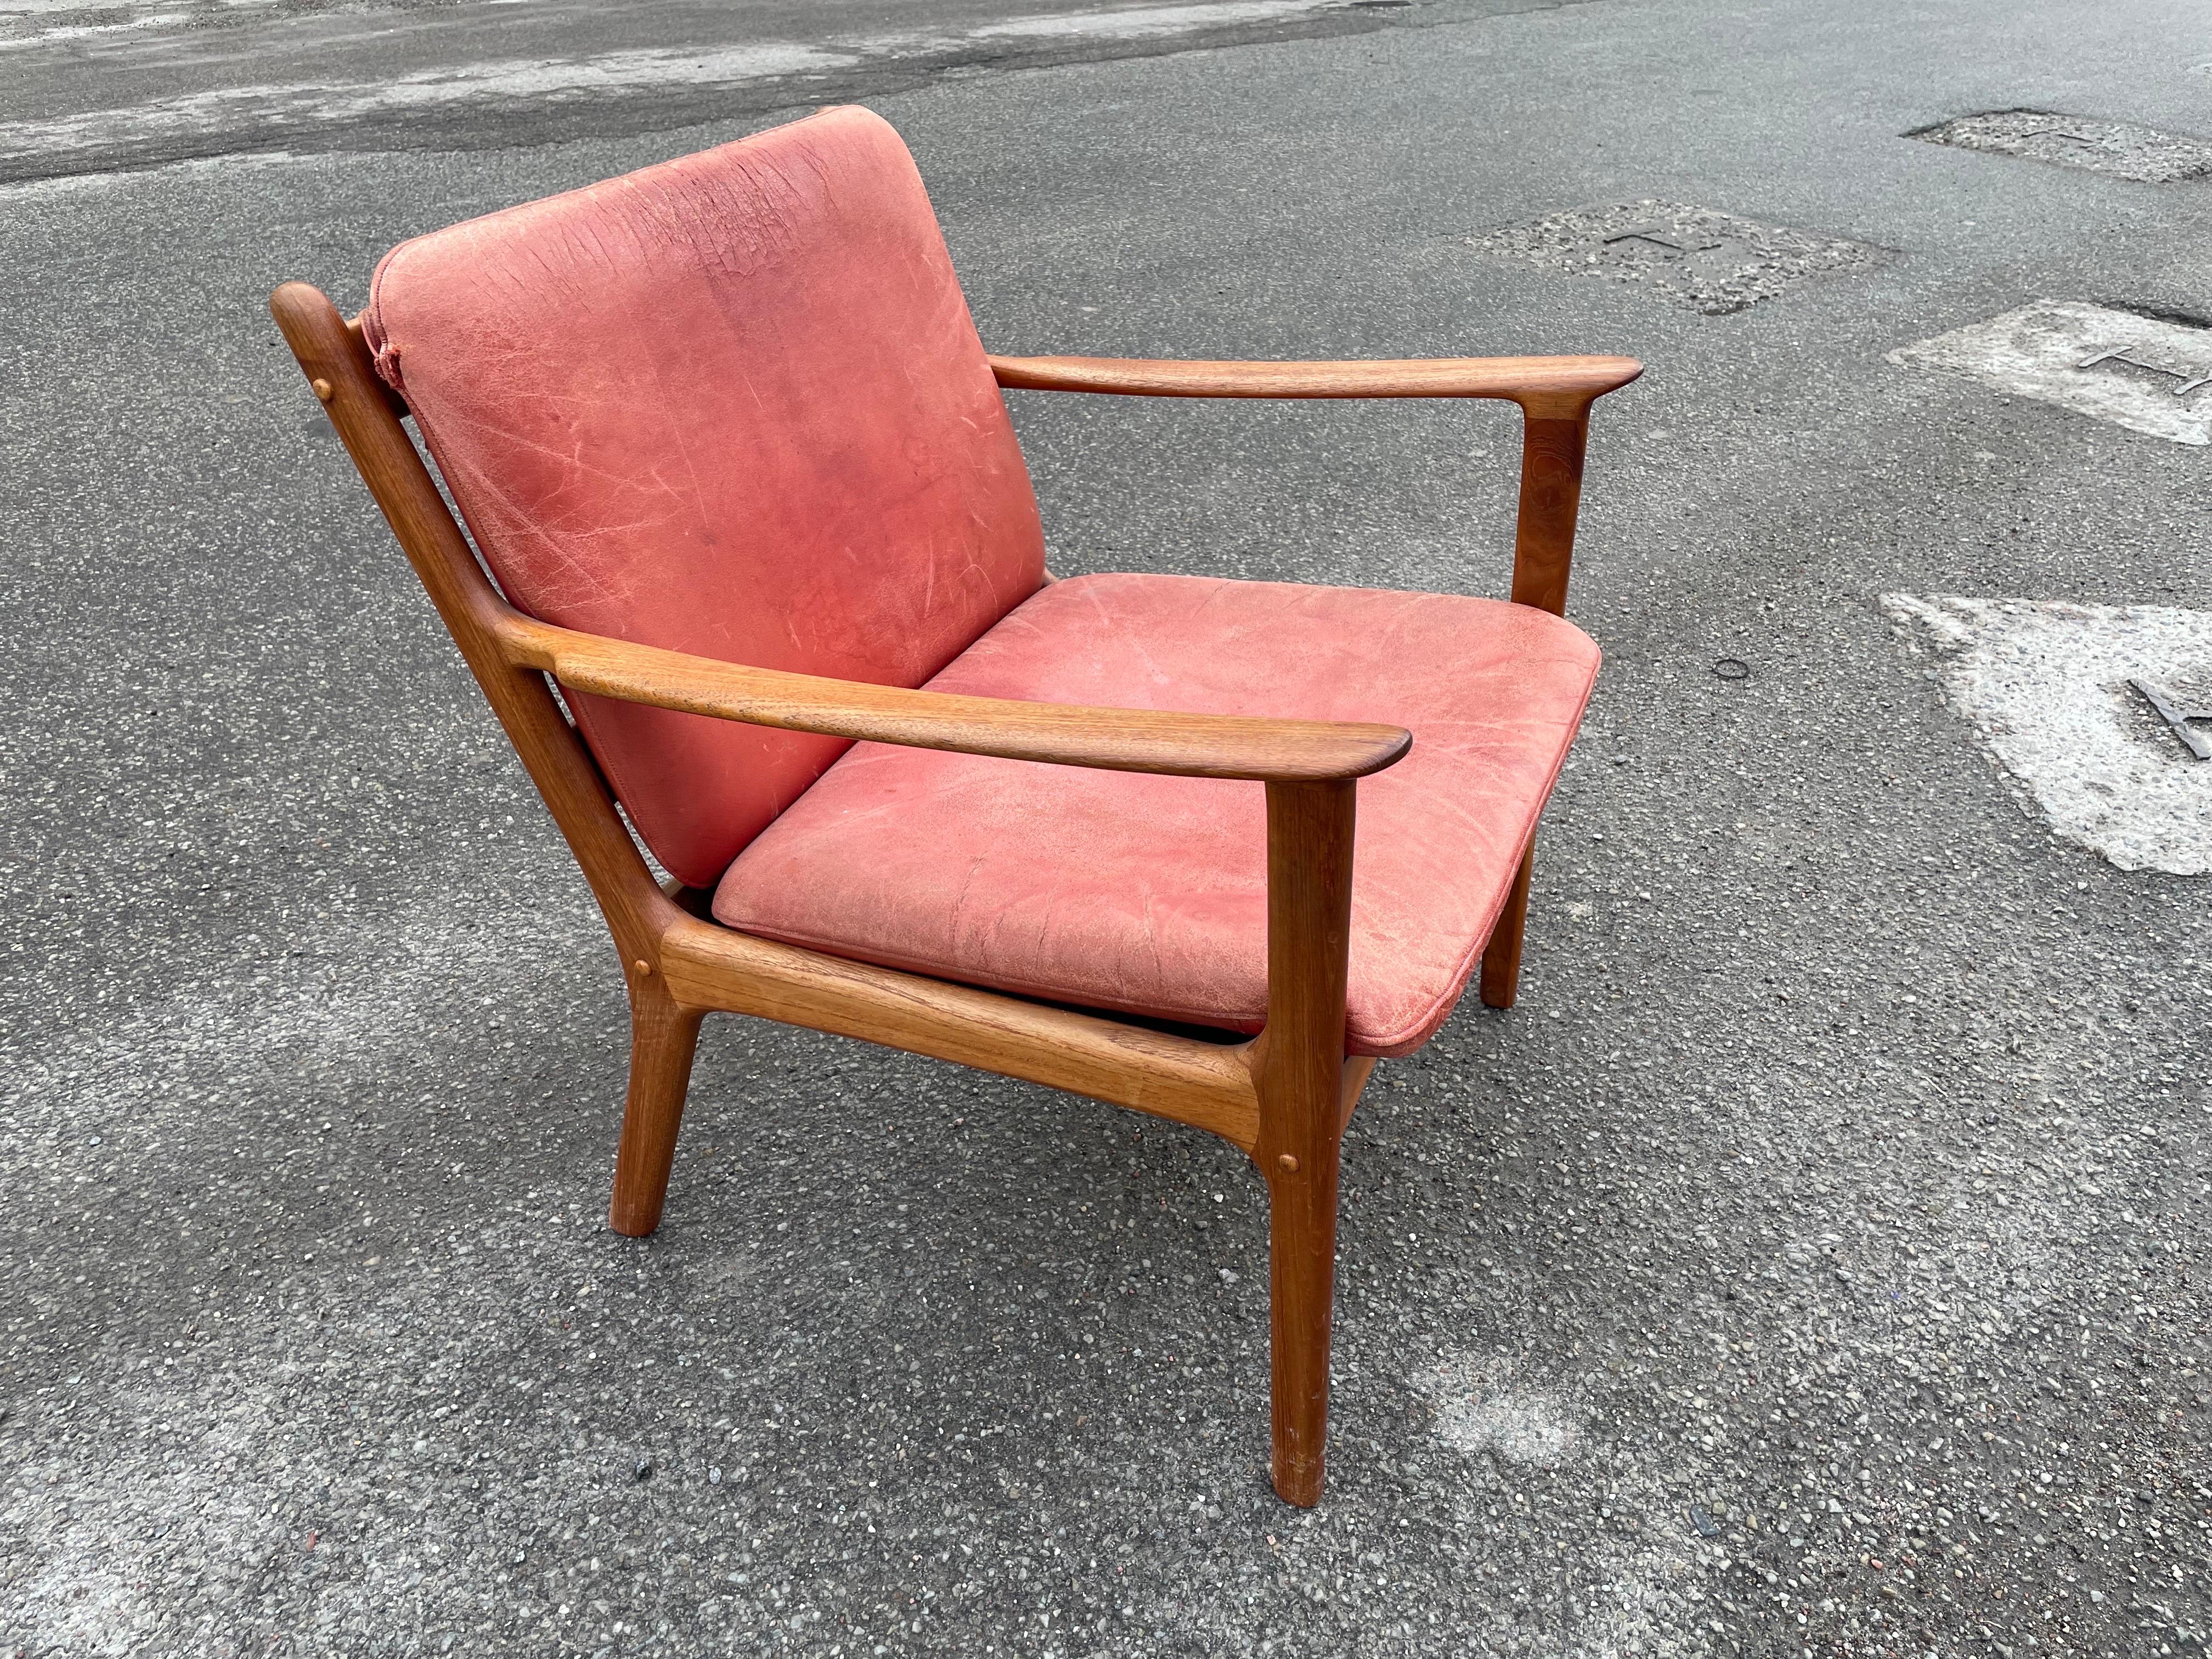 Ole Wanscher, chair, model 'PJ 112' teak Denmark, 1950s.
This chair is designed by Ole Wanscher. The frame shows elegant lines, especially in the armrests. Ole Wanscher, chair, model 'PJ 112' teak.

Upholstery can be facilitated by request.